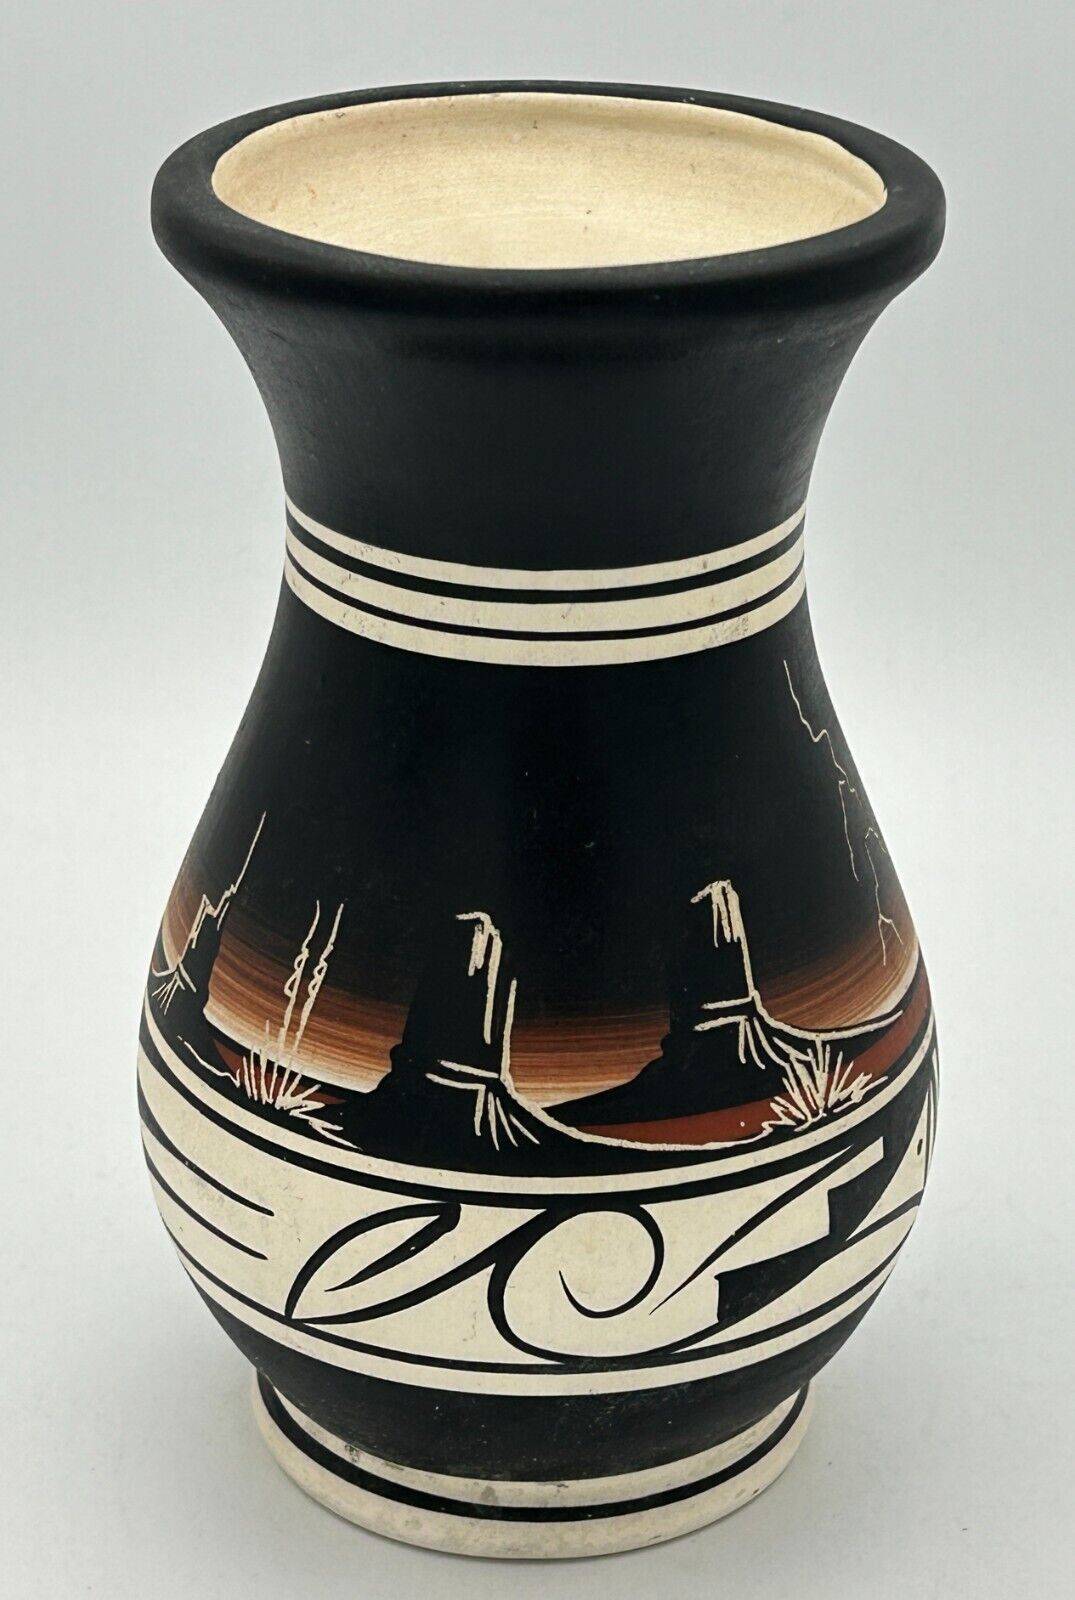 Navajo Pottery Vase Signed by Artist Chala Monument Valley 7”